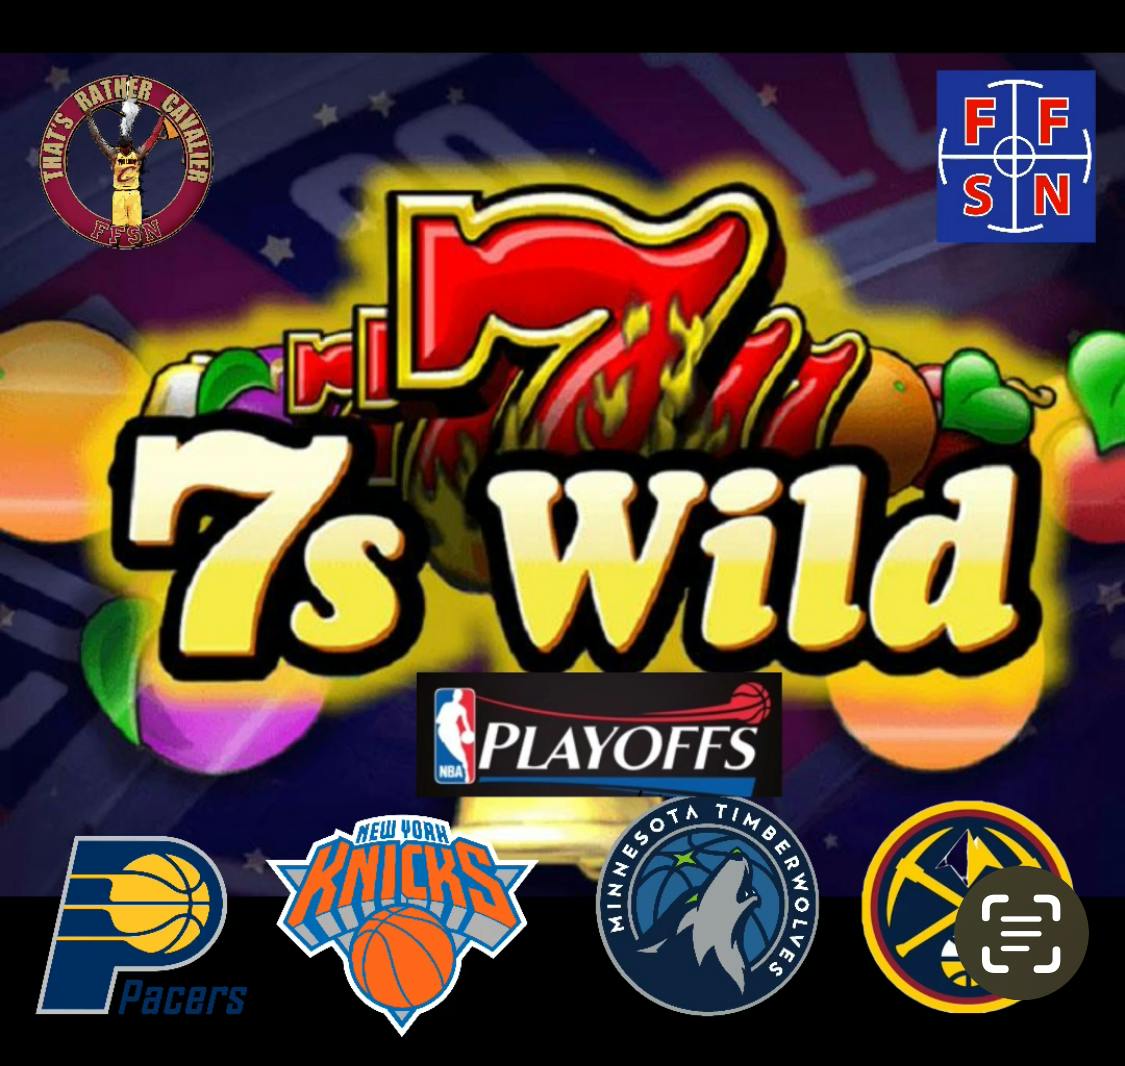 “Seven’s Wild: TRC Previews Two Game 7’s Today”